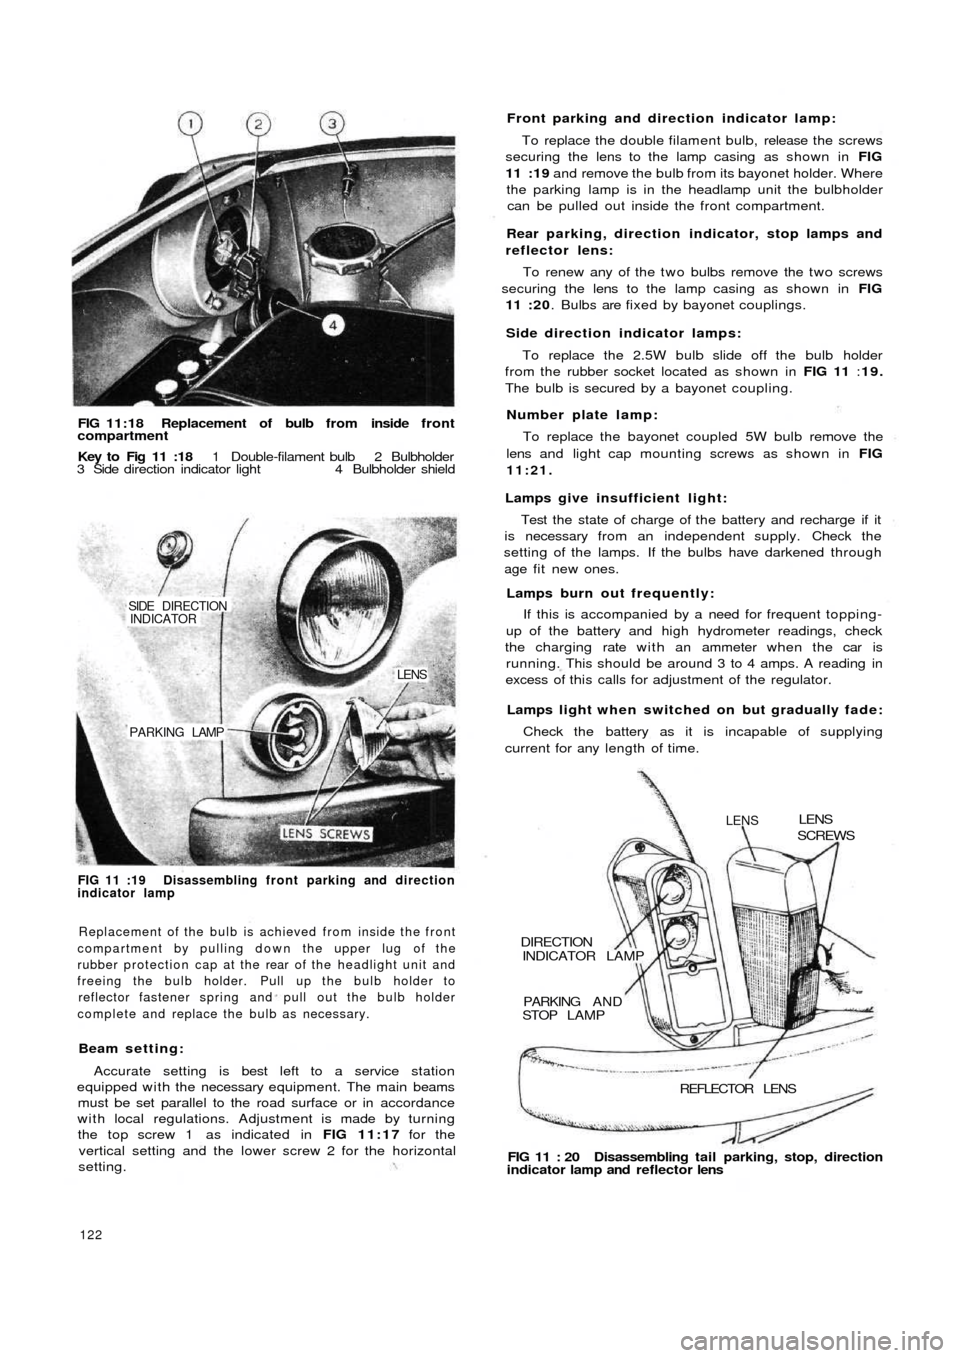 FIAT 500 1958 1.G Workshop Manual FIG 11:18 Replacement of bulb from inside f r o n tcompartment
Key to  Fig 11 :18 1 Double-filament bulb 2 Bulbholder
3 Side direction indicator light 4 Bulbholder shield
PARKING LAMP
LENS
SIDE  DIREC